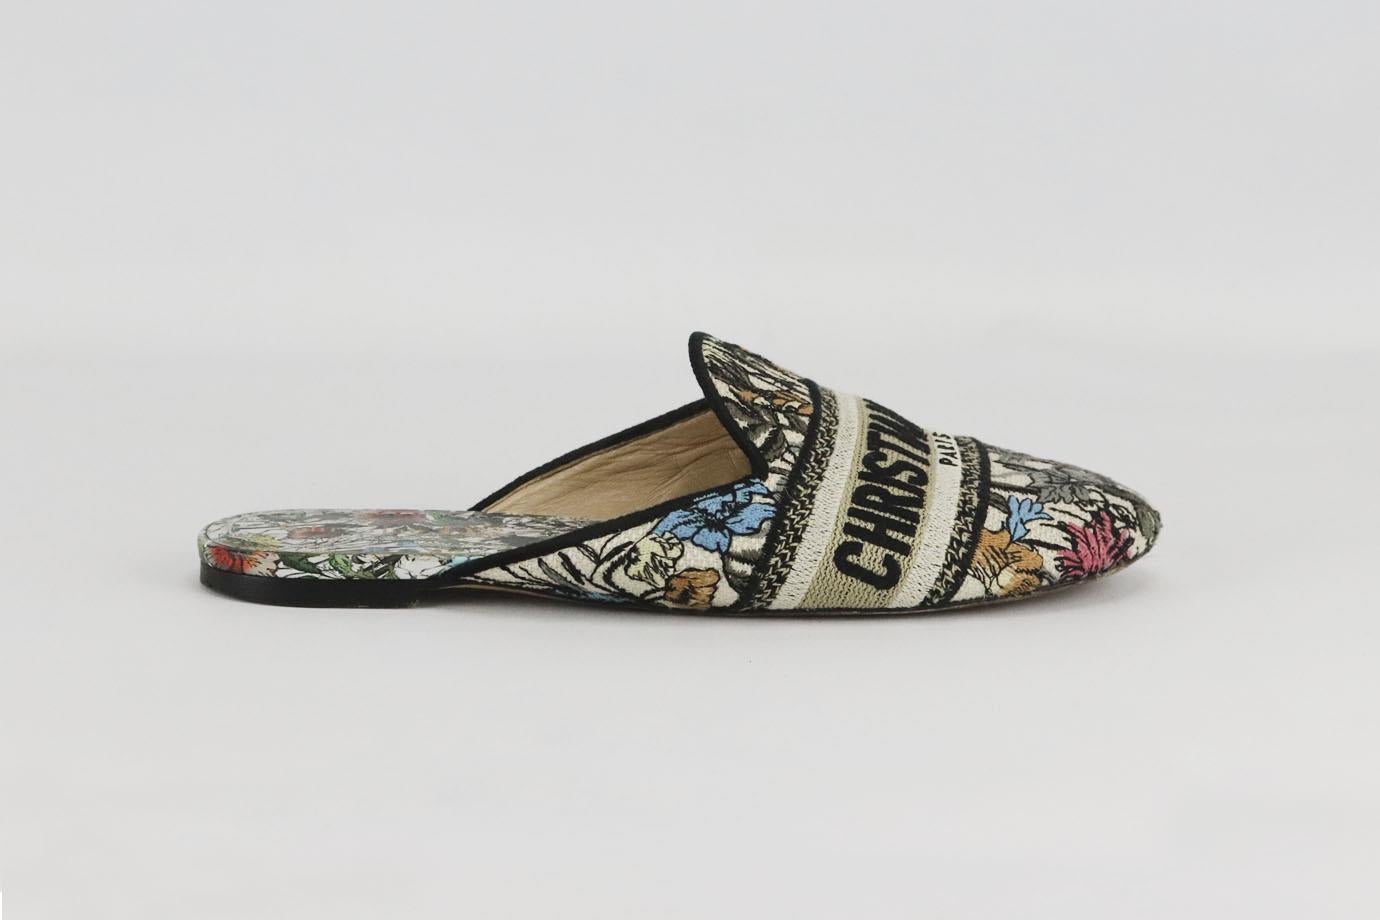 Christian Dior DWay embroidered cotton canvas and leather slippers. Multicoloured. Slip on. Comes with dustbag. Size: EU 38.5 (UK 5.5, US 8.5). Insole: 9.7 in. Heel: 0.8 in Very good condition - Wear to soles. Some wear to upper material; see